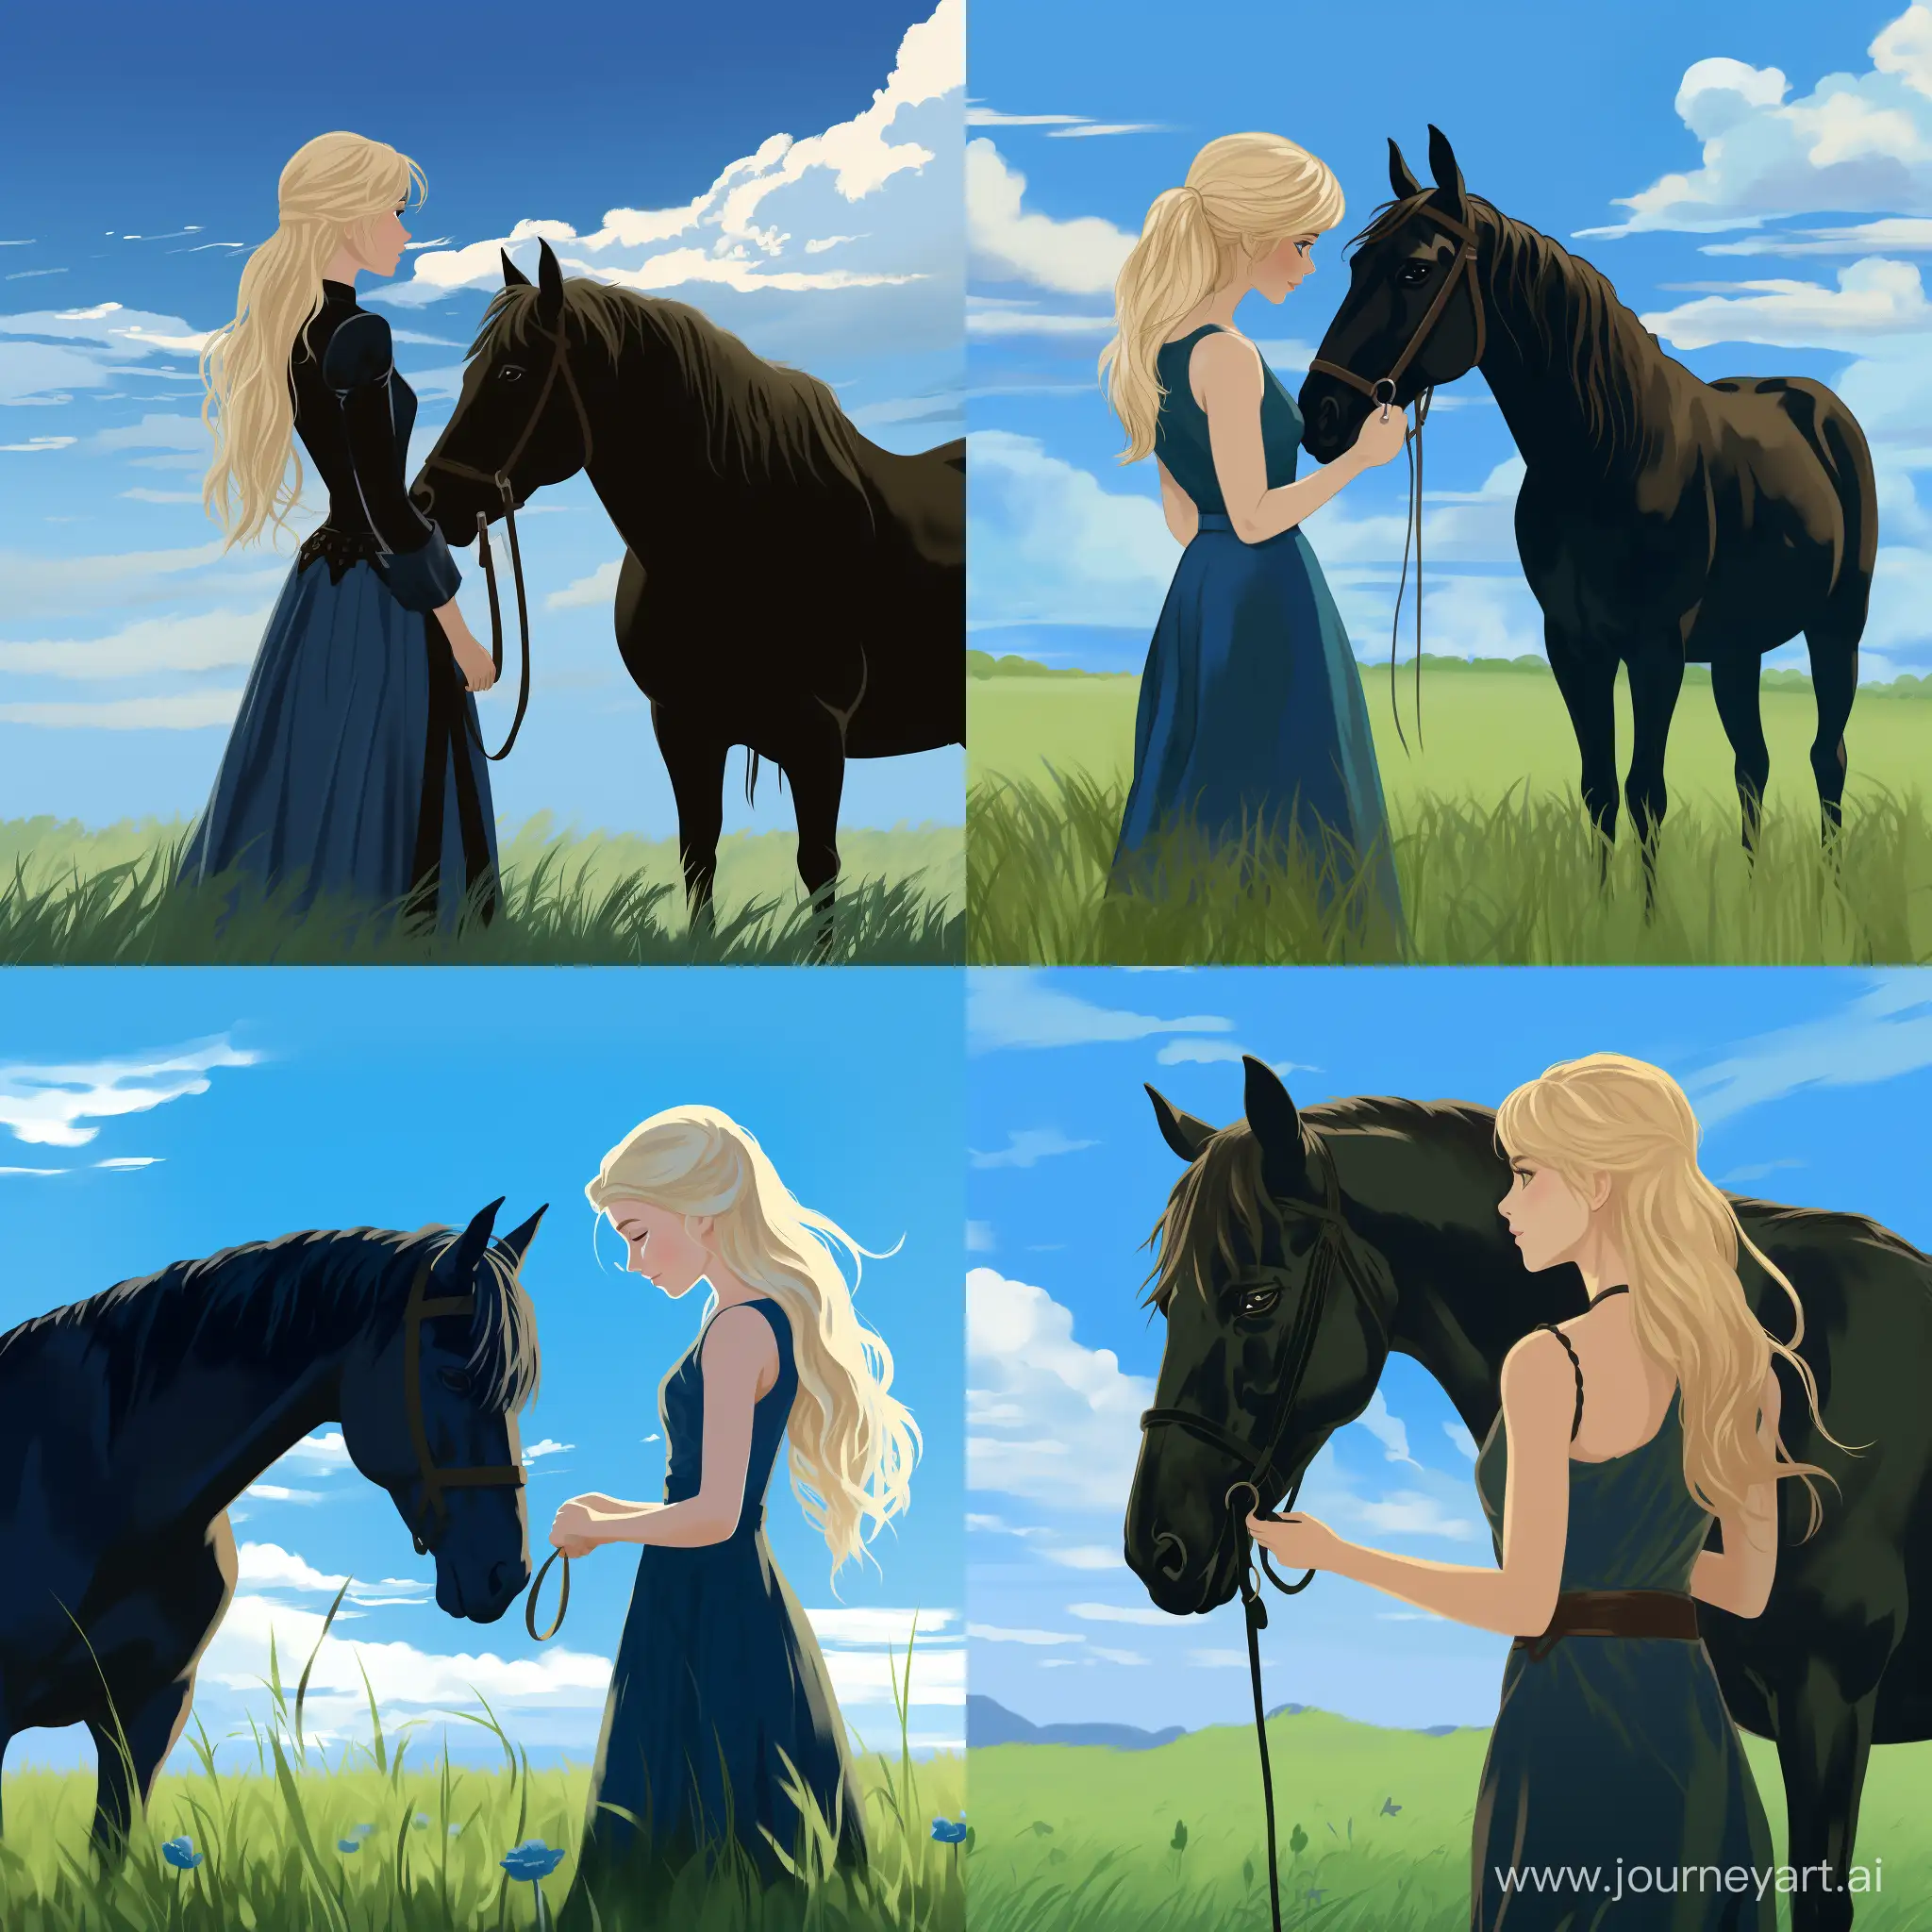 Blonde-Girl-in-Blue-Dress-Admires-Majestic-Black-Horse-on-Green-Meadow